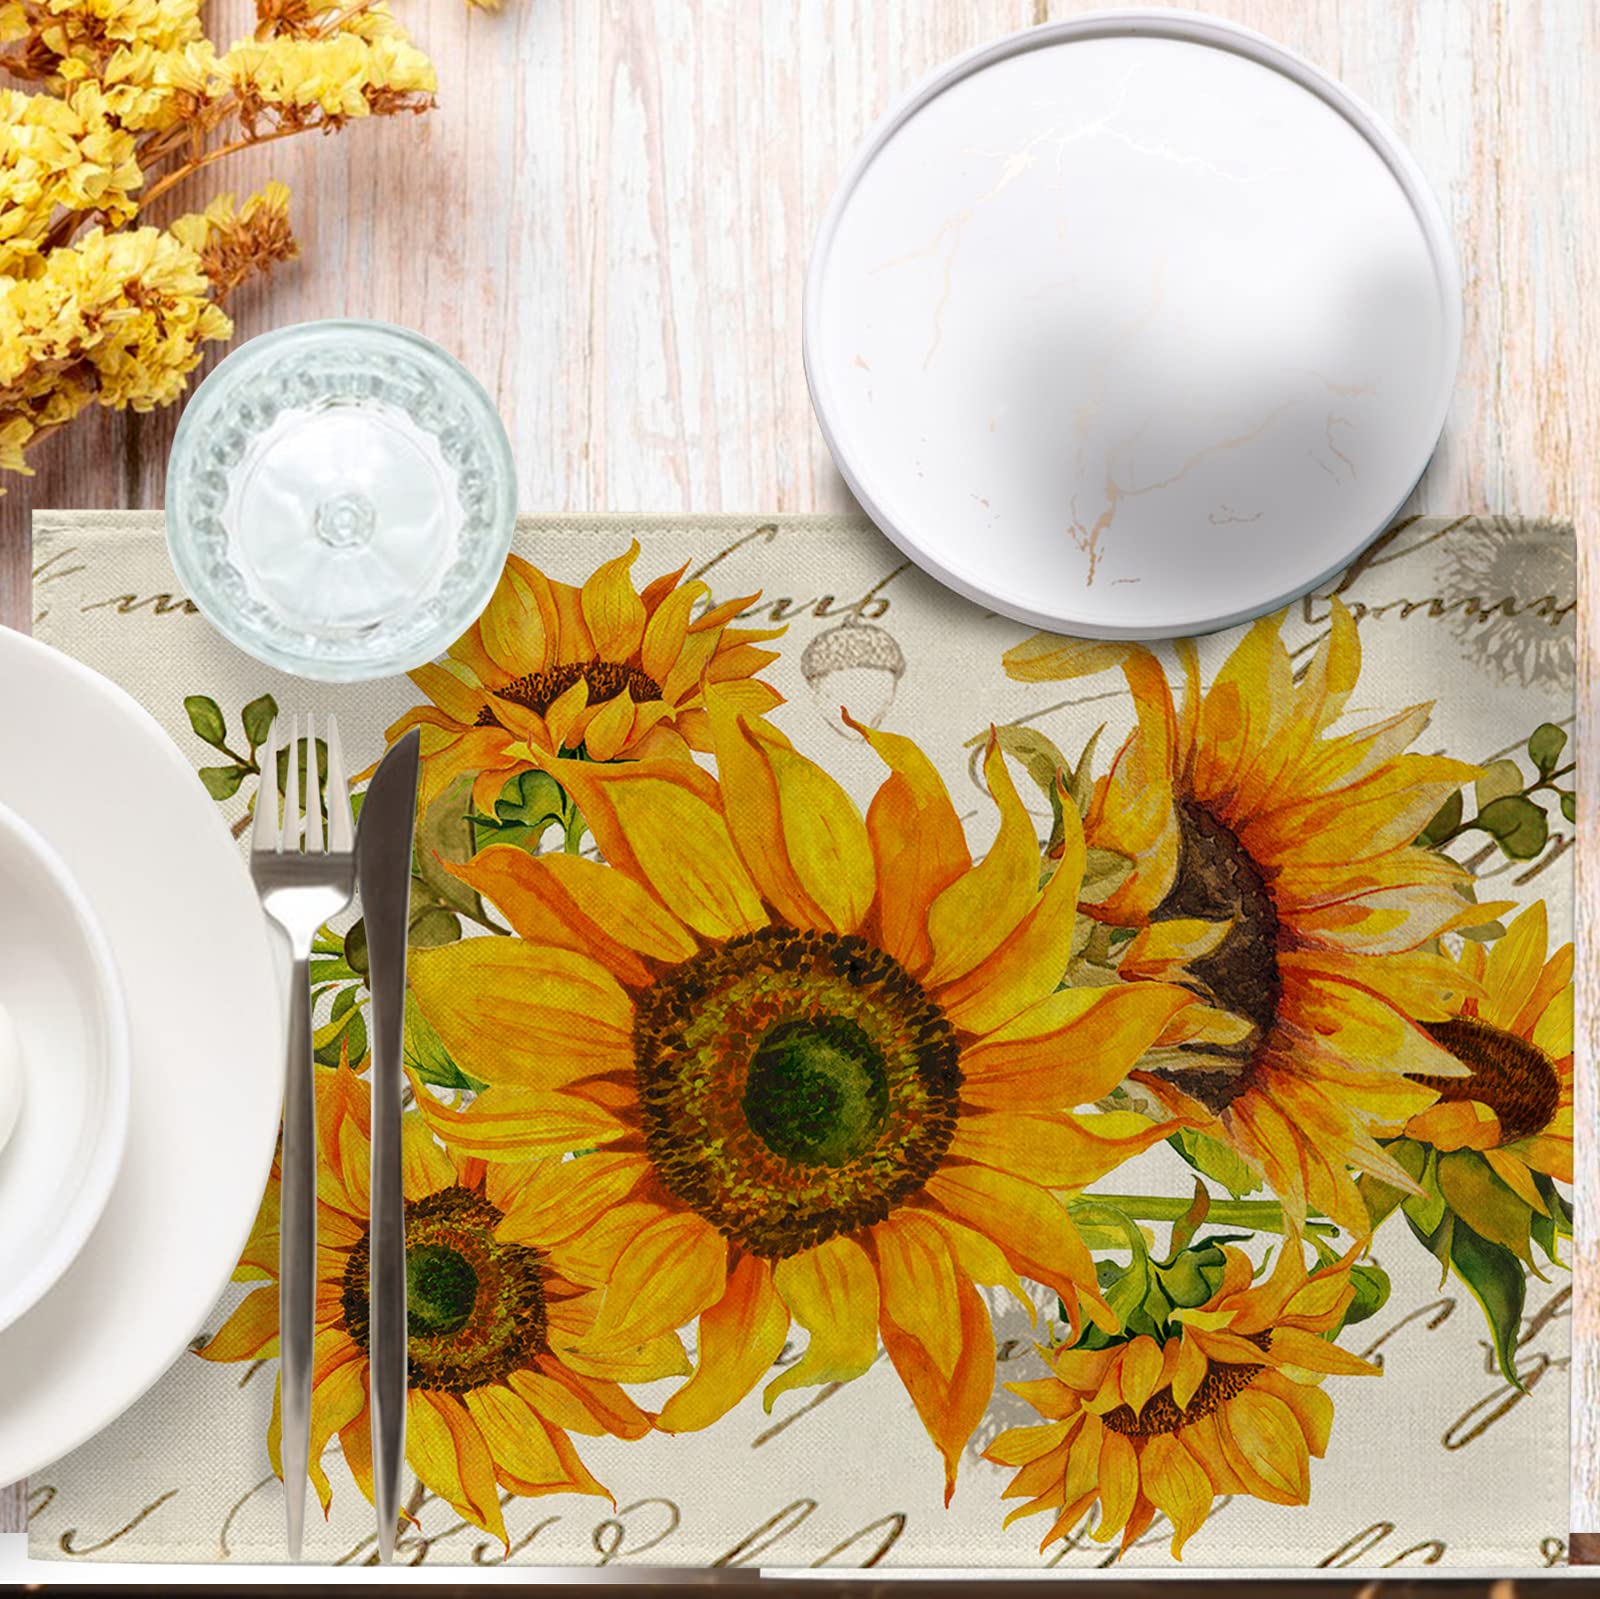 Seliem Fall Sunflower Placemats Set of 4, Spring Summer Yellow Floral Flowers Rustic Vintage Dining Table Place Mats, Eucalyptus Leaves Seasonal Kitchen Decor Home Decoration 12 x 18 Inch